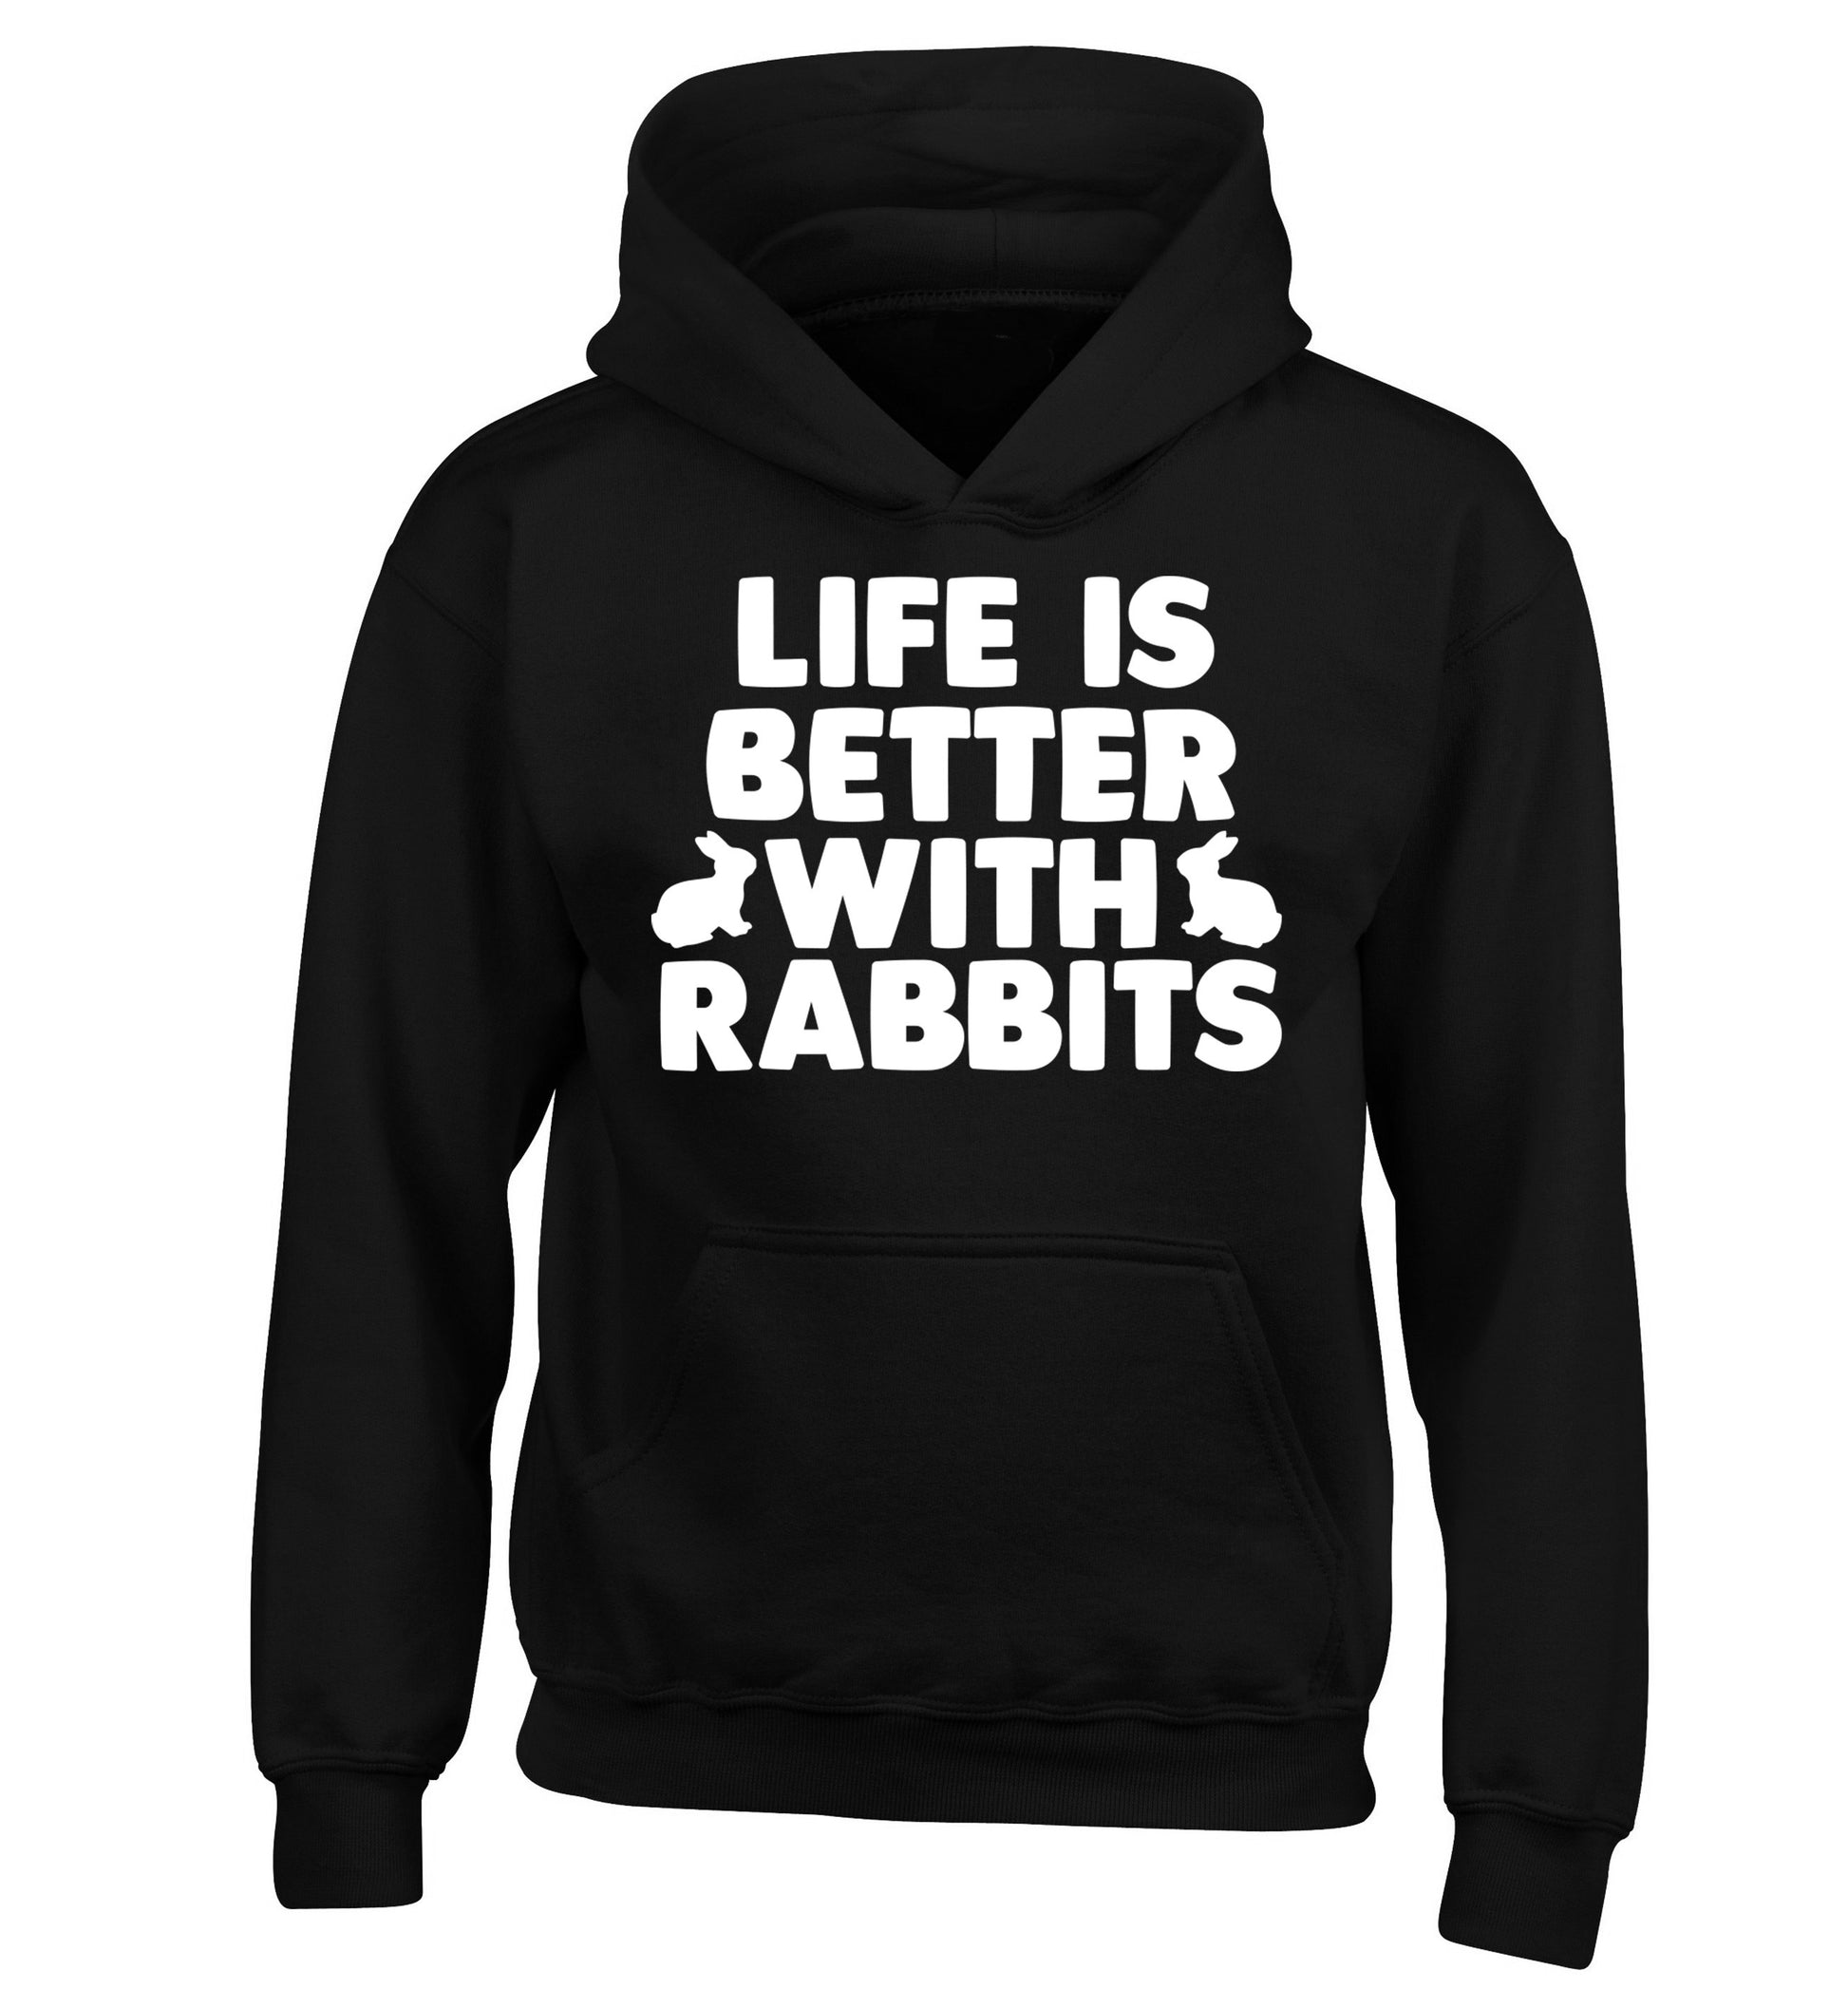 Life is better with rabbits children's black hoodie 12-14 Years